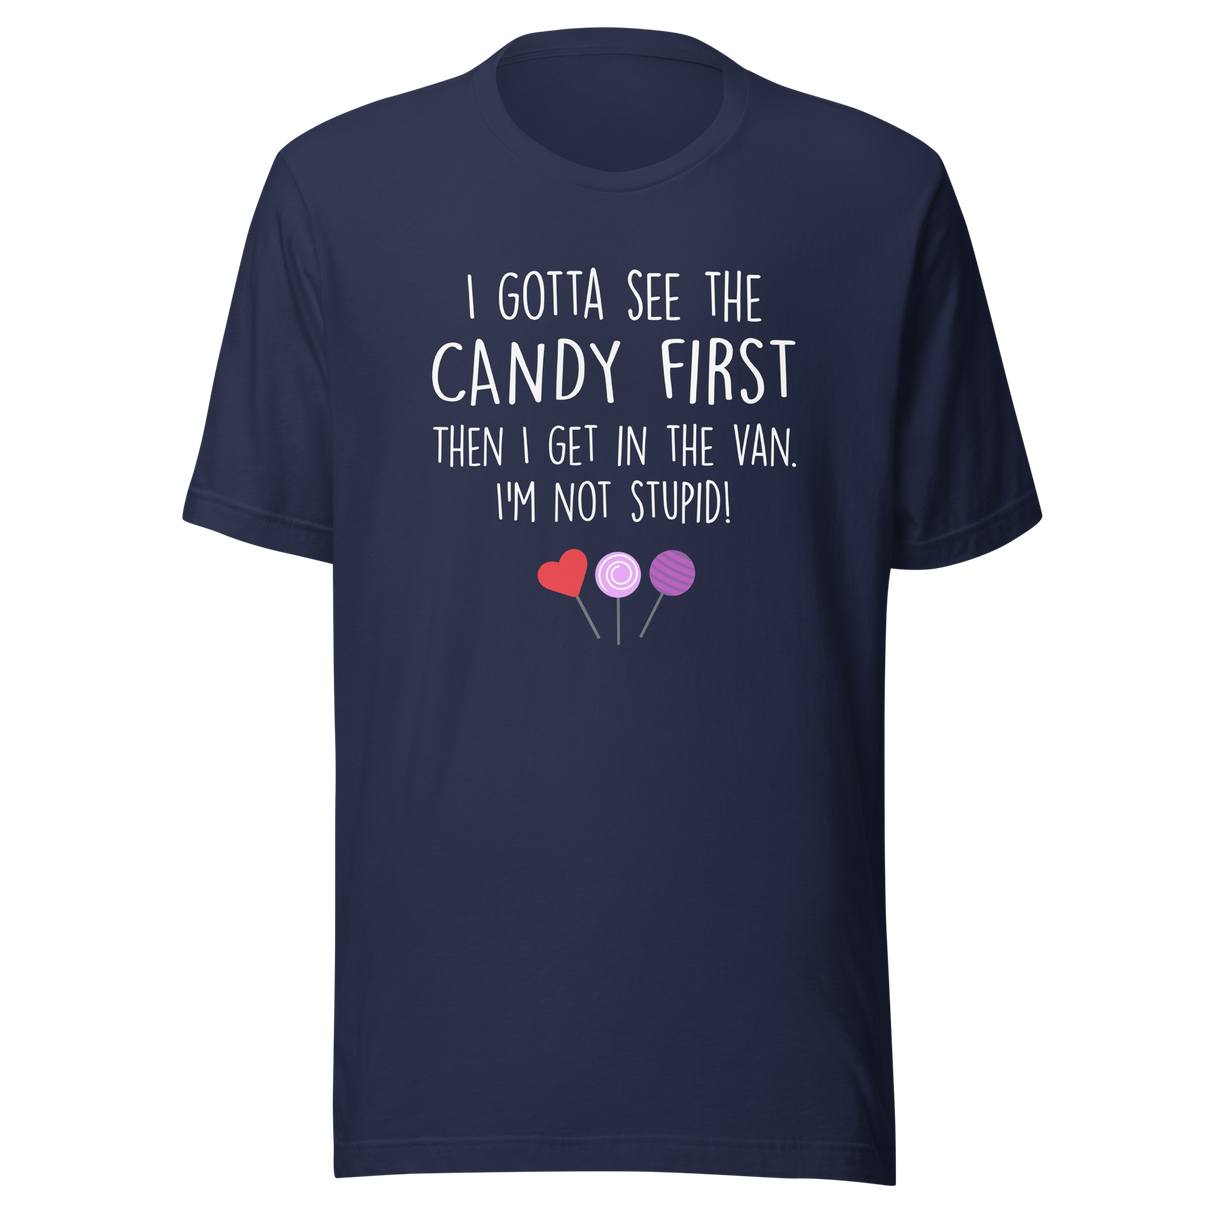 i-gotta-see-the-candy-first-then-i-get-in-the-van-im-not-stupid-funny-tee-candy-t-shirt-van-tee-t-shirt-tee#color_navy